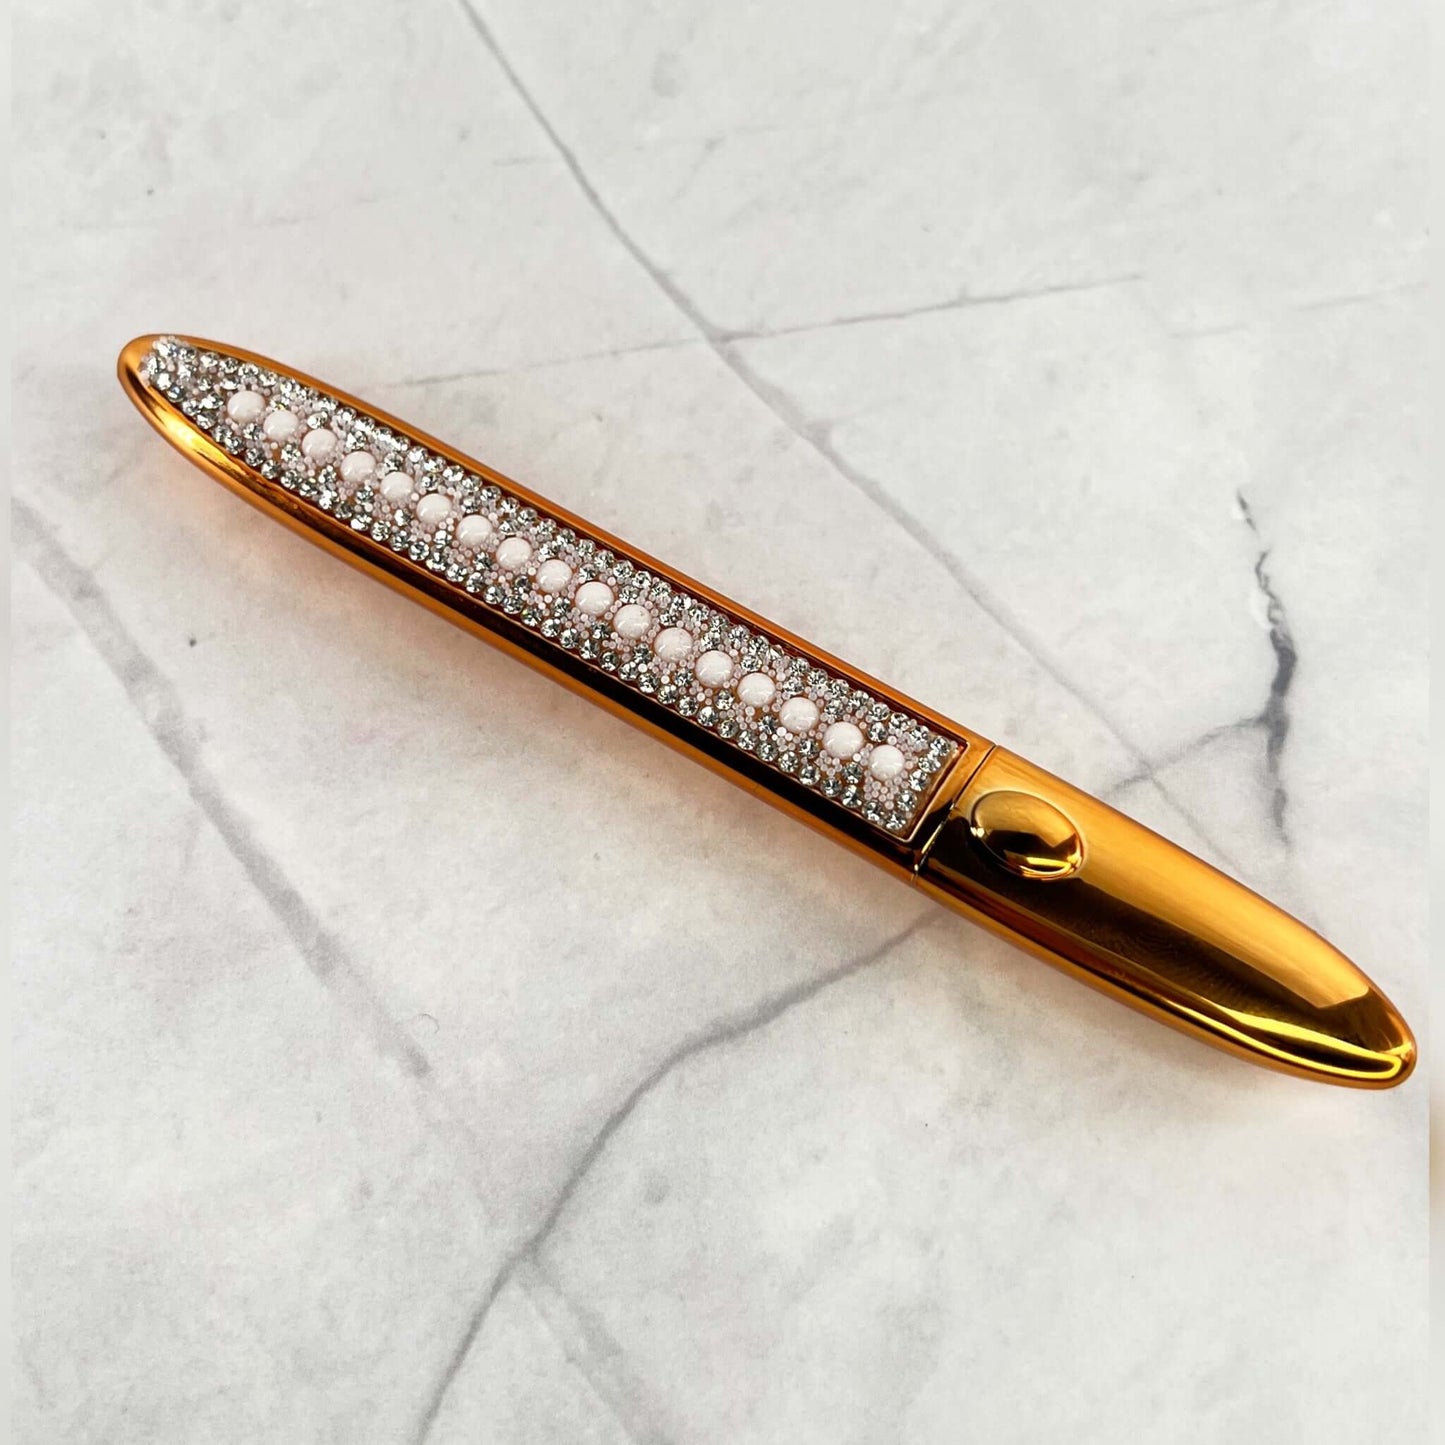 The outside of the Bold and Luscious Diamond Status Magic Lash is affixed with faux diamonds and pearls and a gold finish casing.